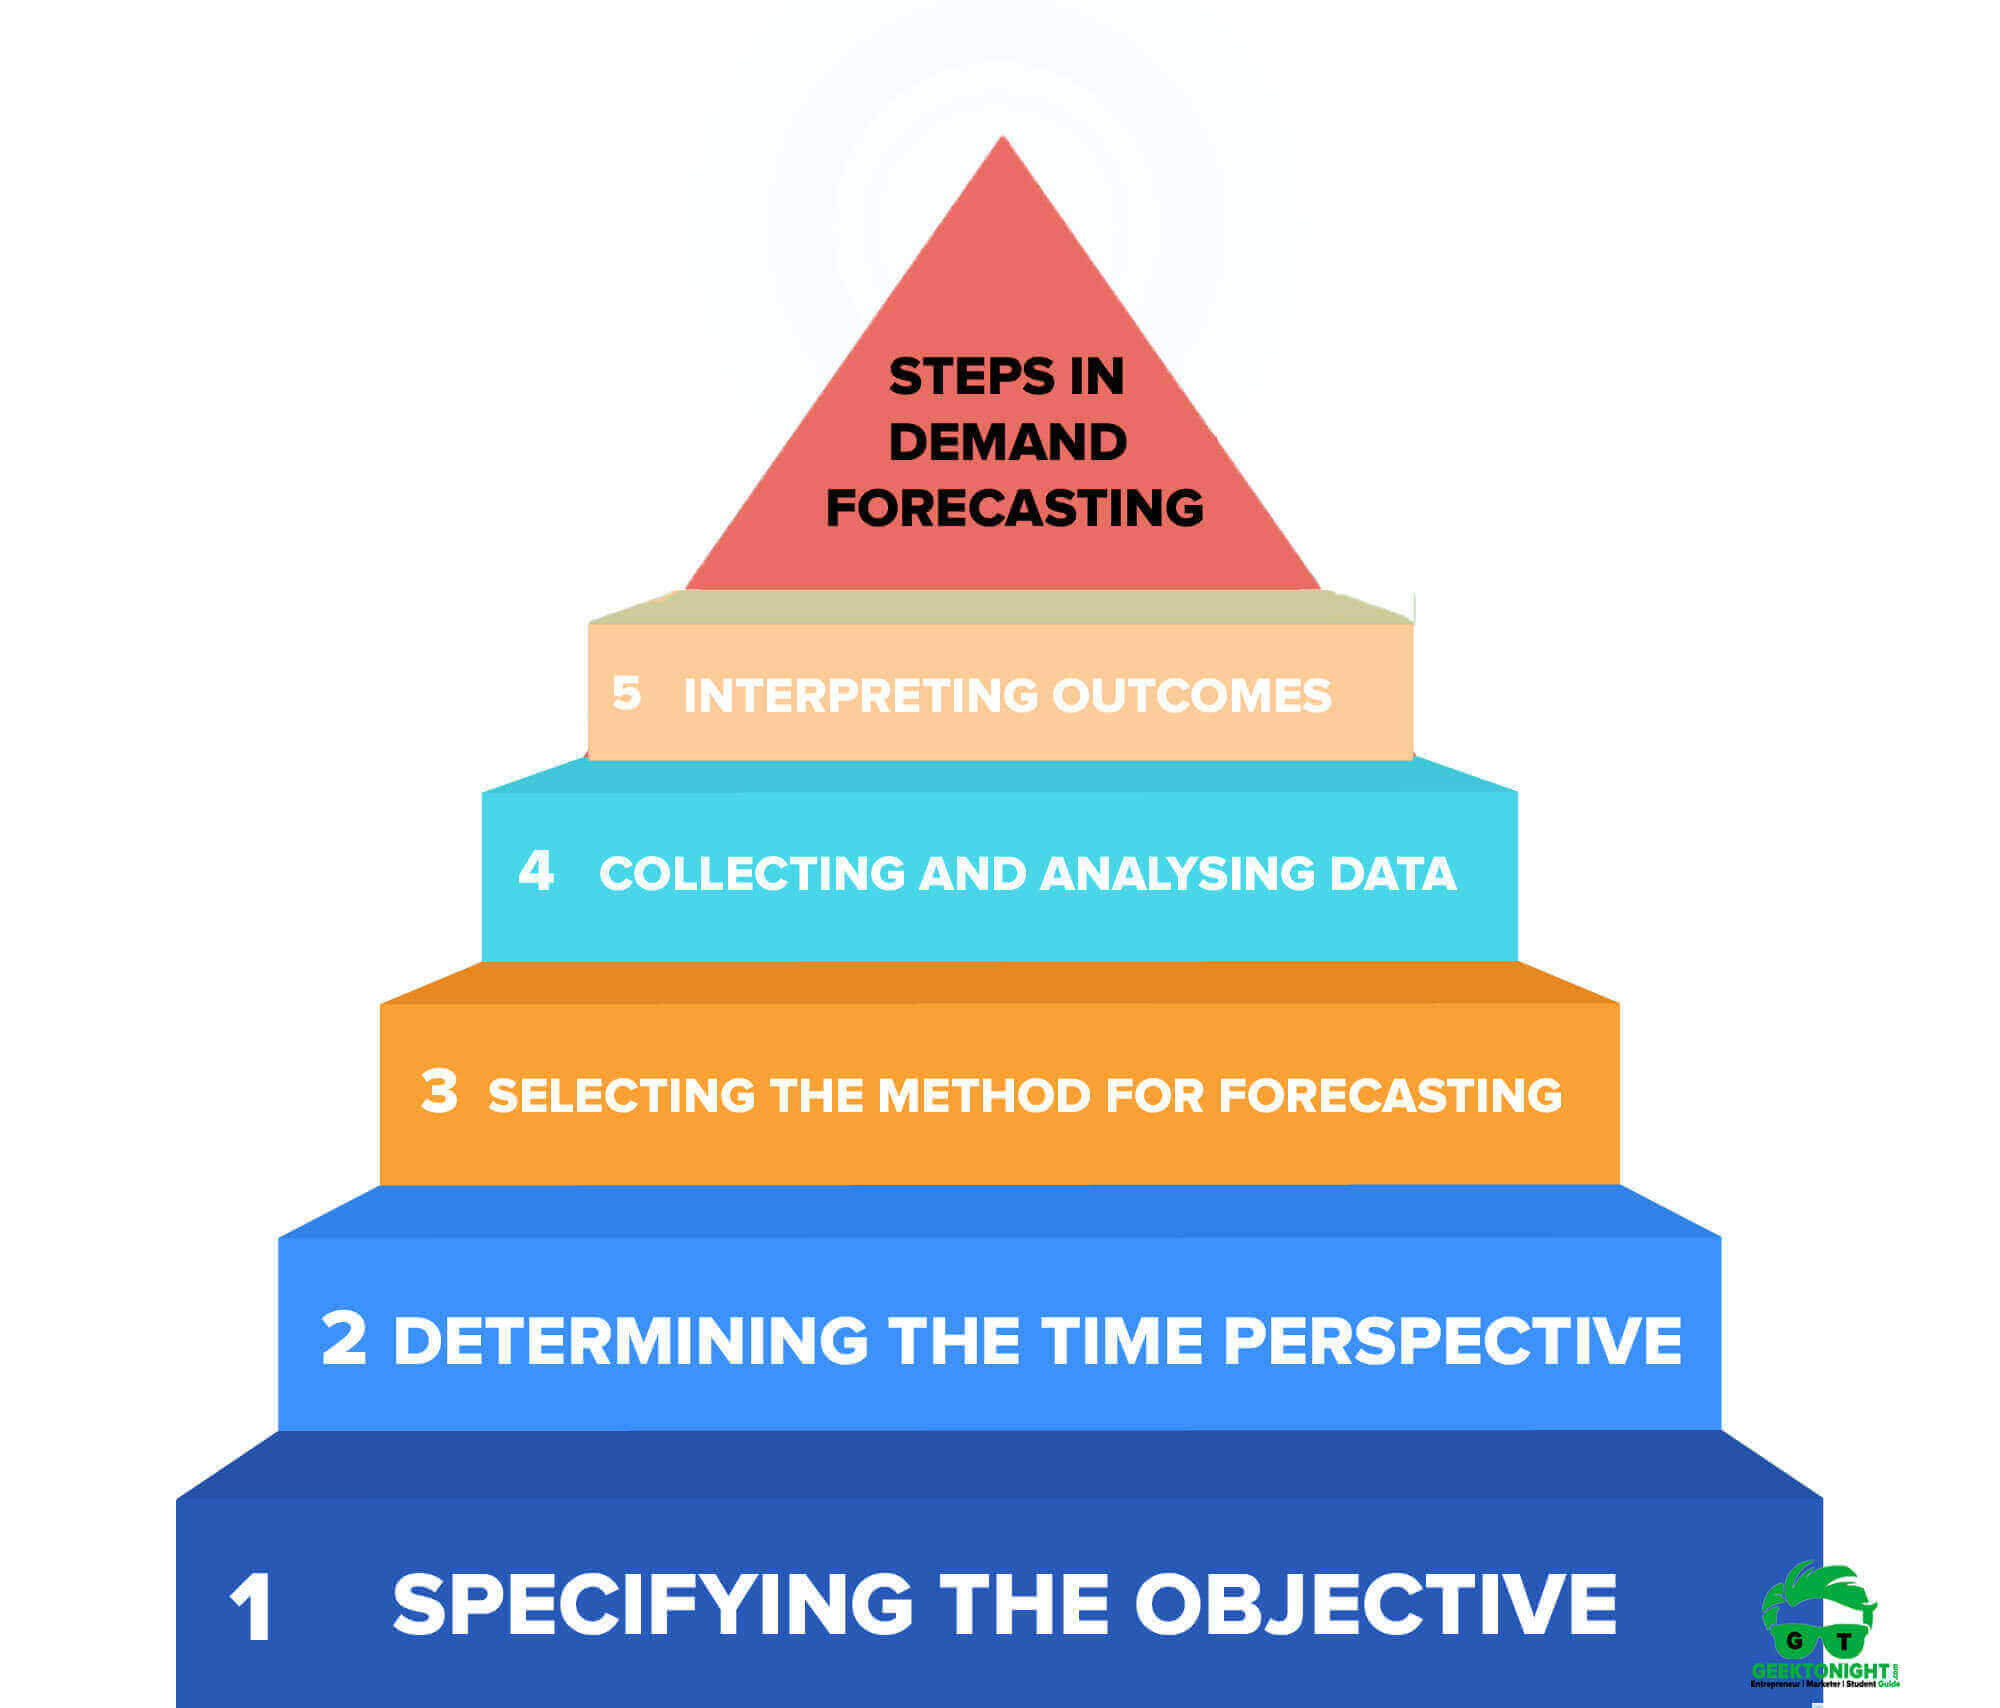 the objective of time nmanagment is to